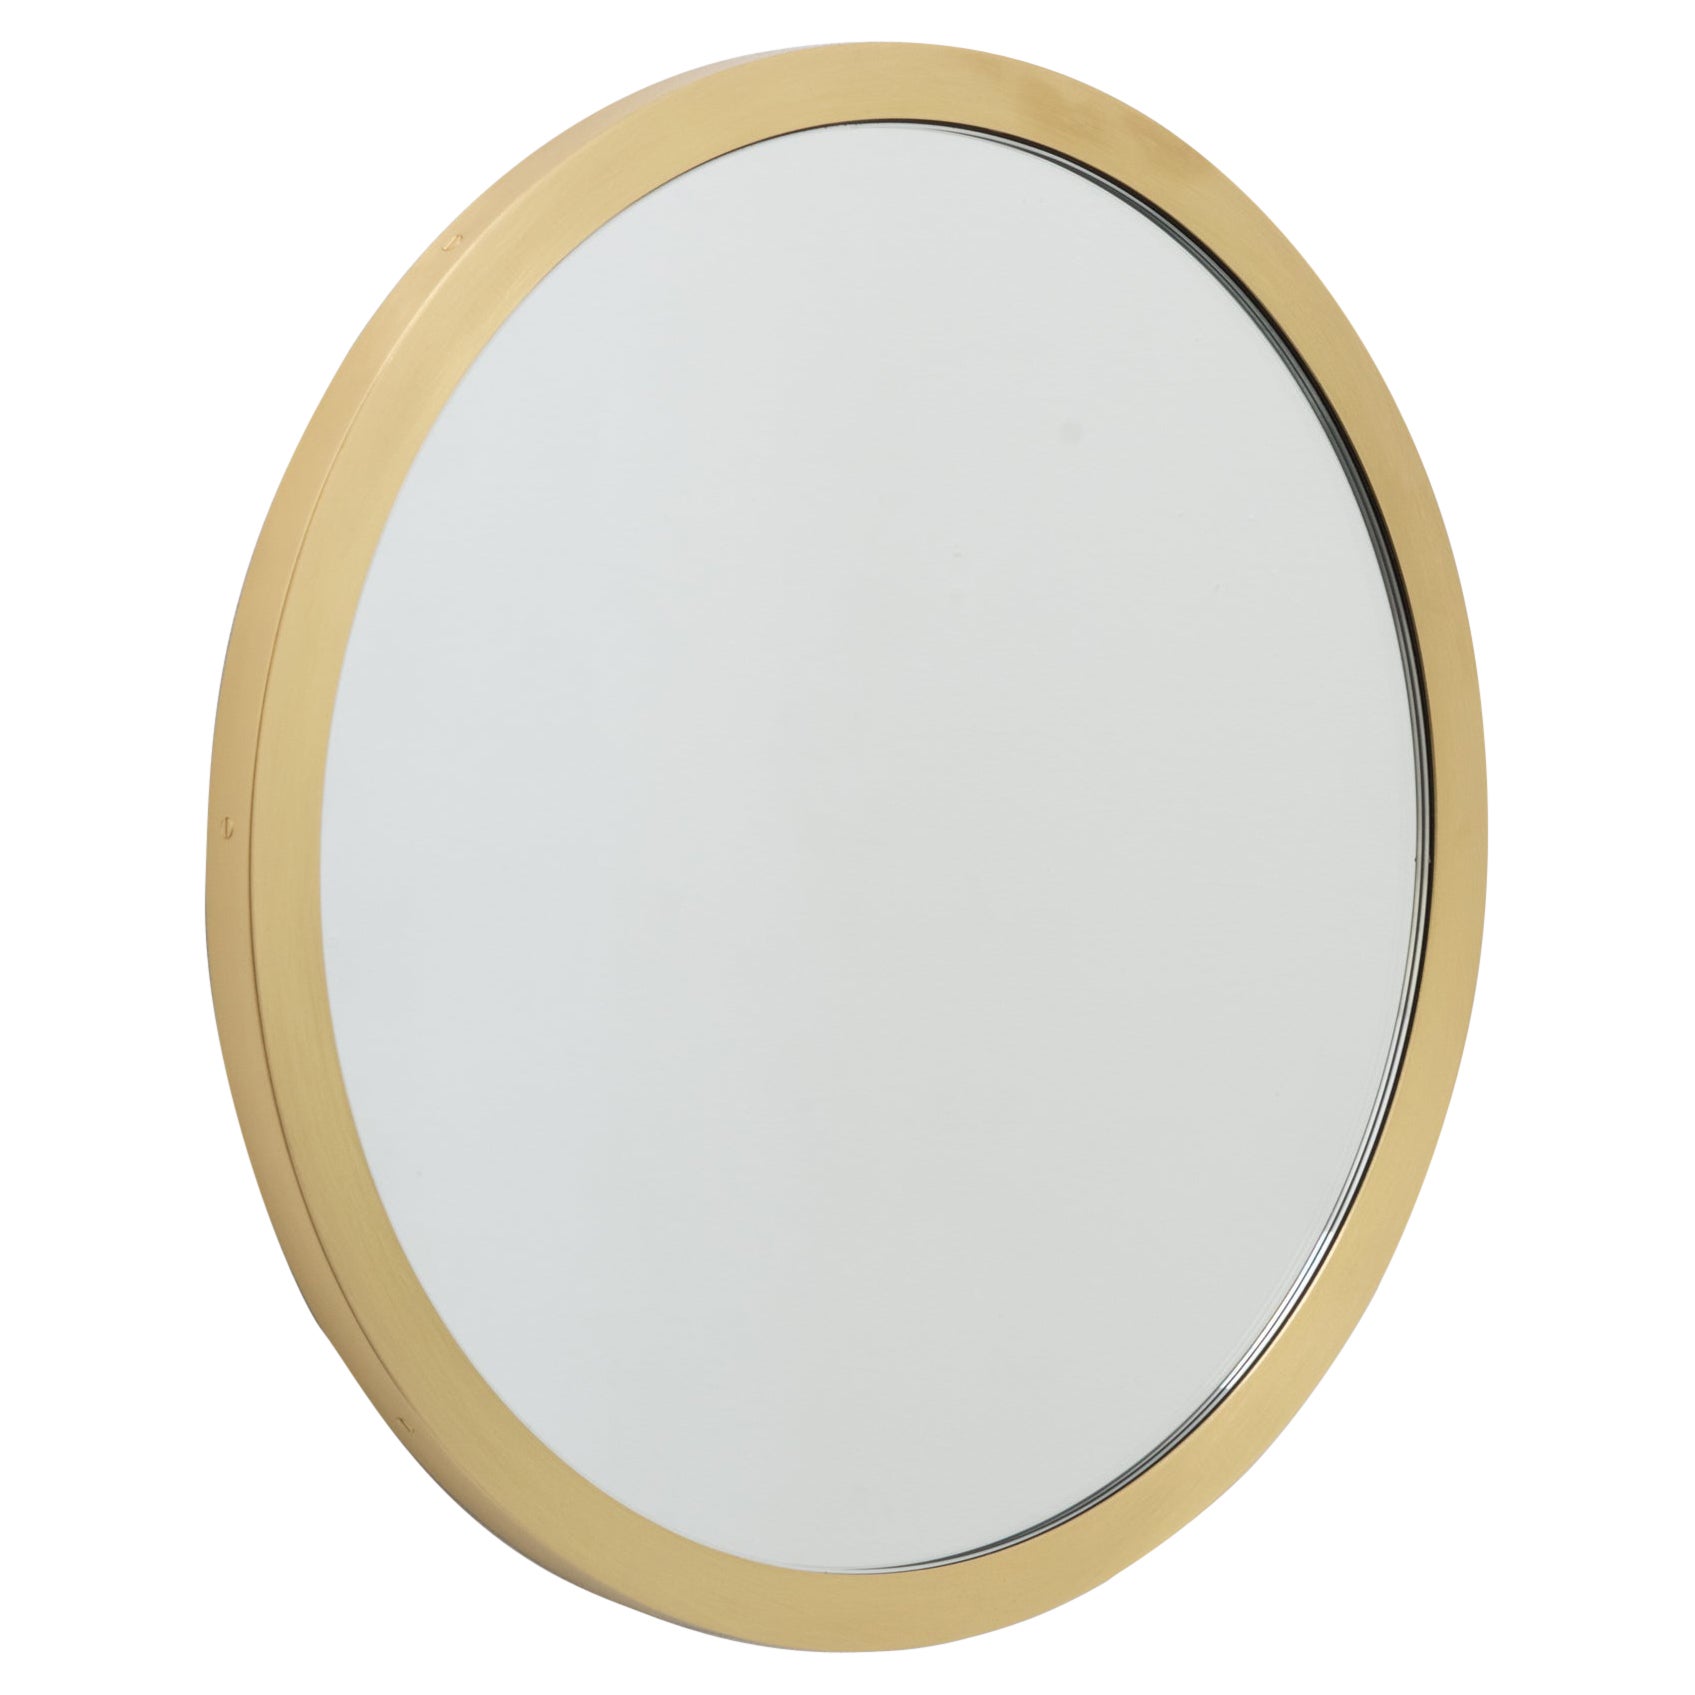 Orbis Round Minimalist Mirror with Full Brushed Brass Frame, Large